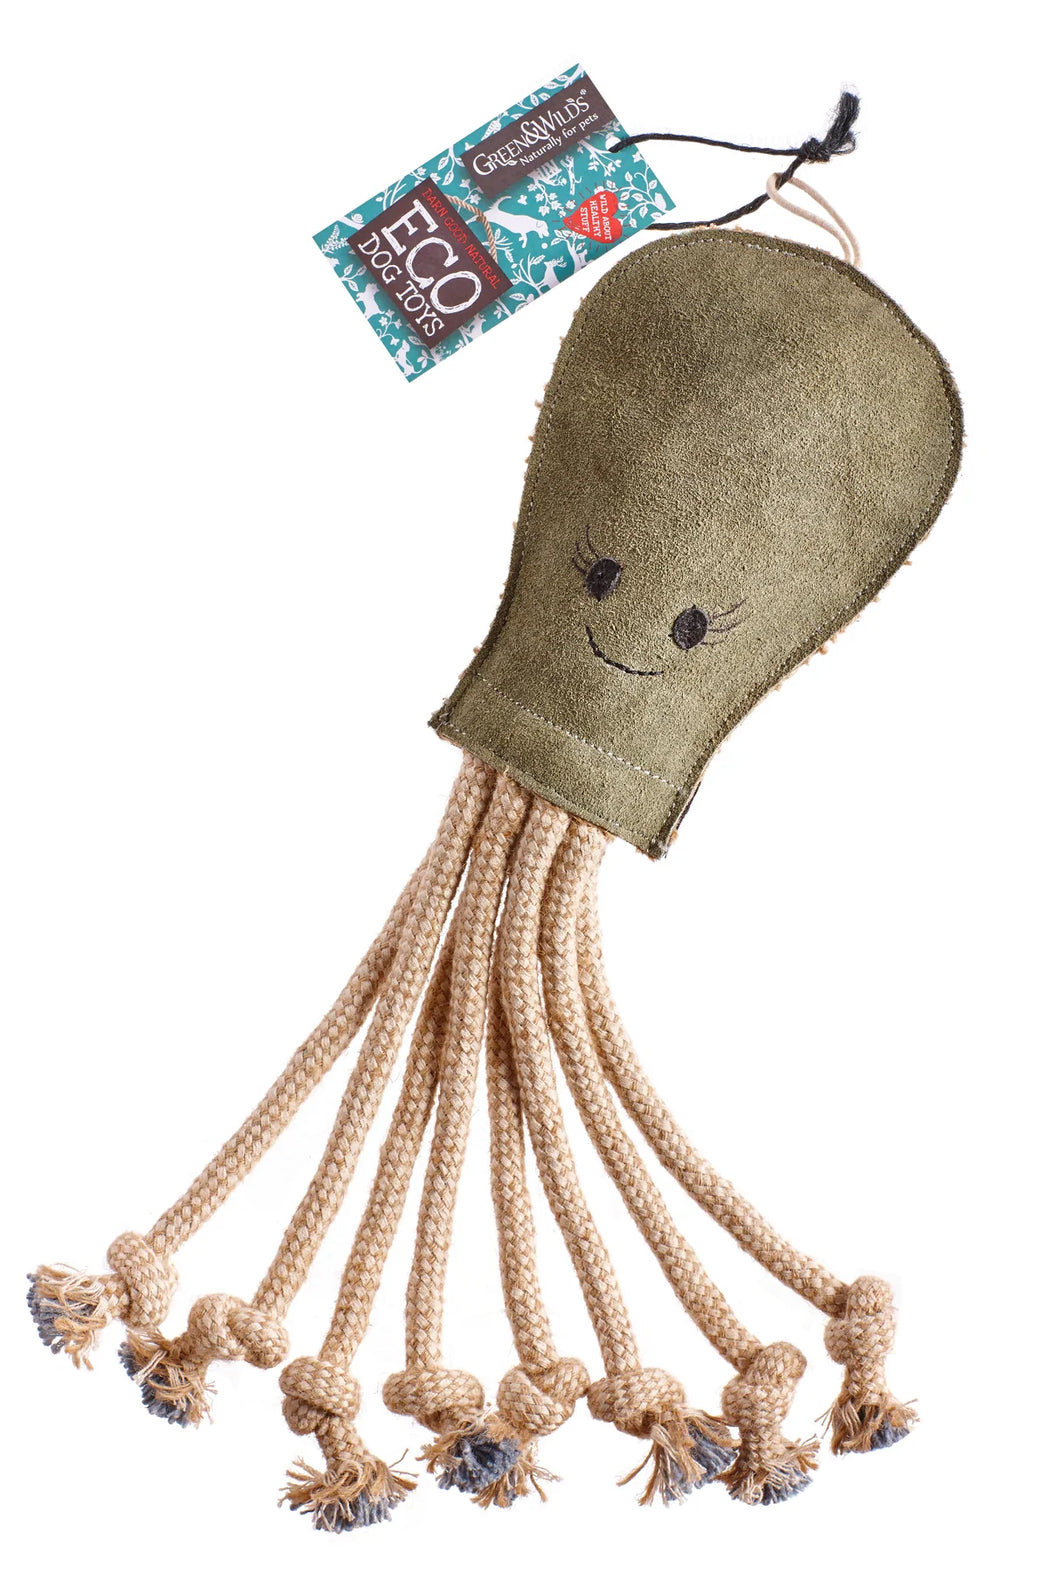 Olive the Octopus, Eco Toy